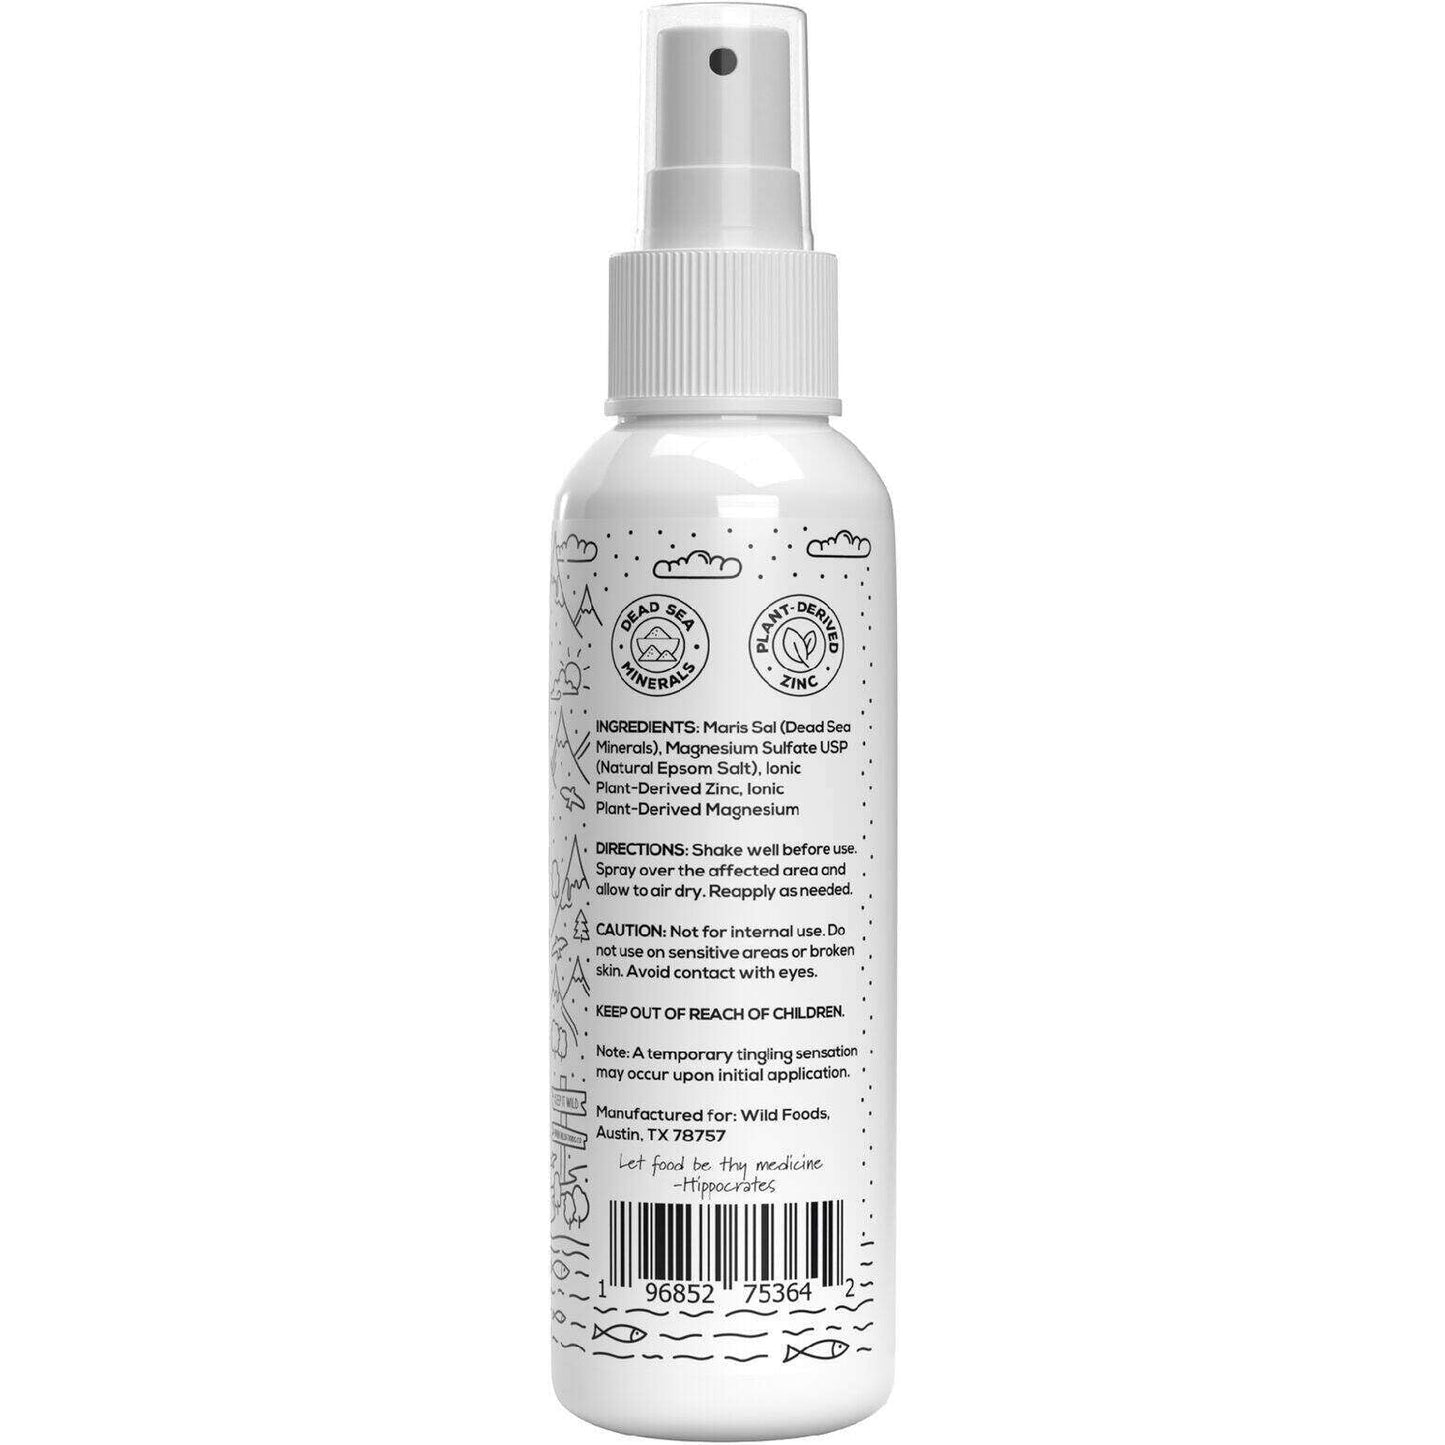 Wild Magnesium Spray From Dead Sea Salt - Case of Six by Wild Foods